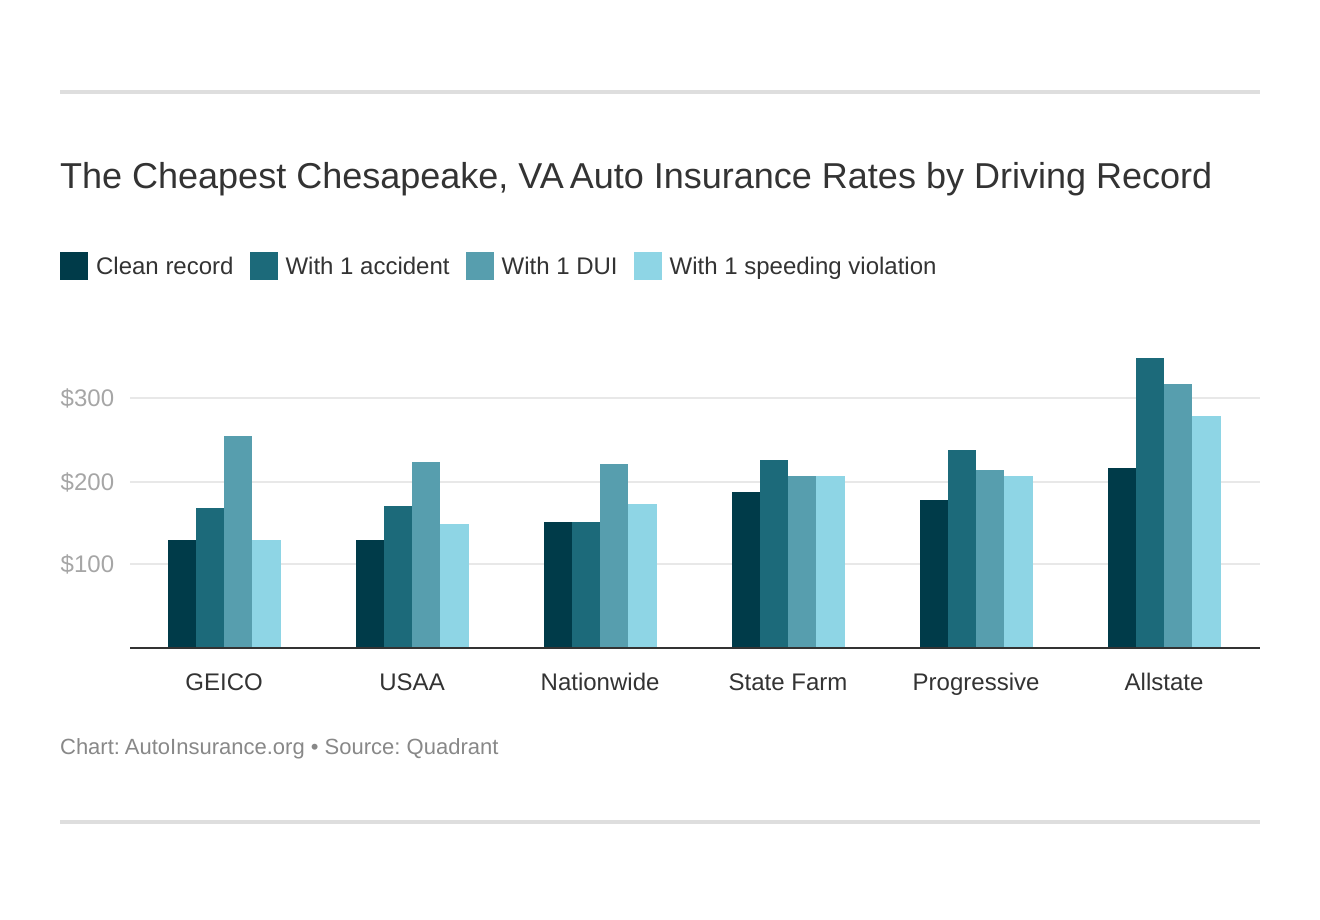 The Cheapest Chesapeake, VA Auto Insurance Rates by Driving Record